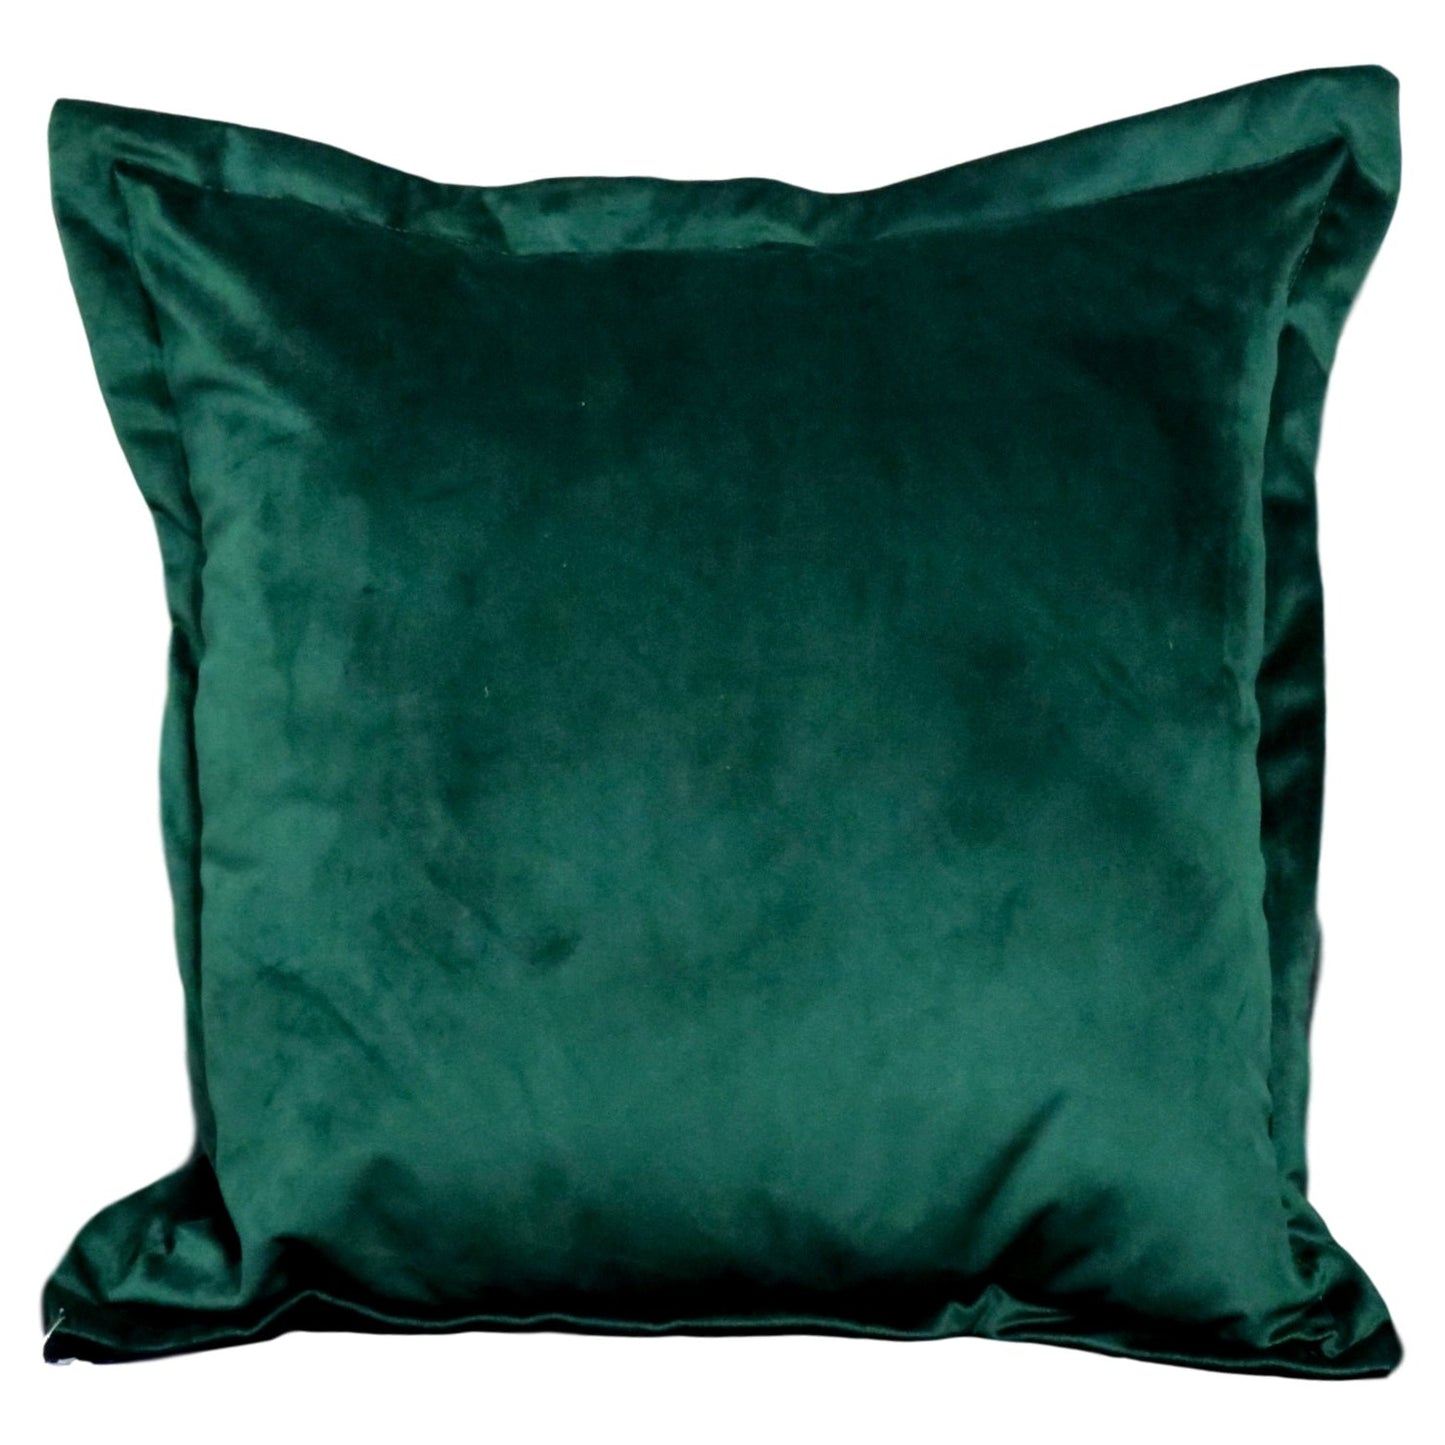 Dark green velvet cushion - feather filled by Native